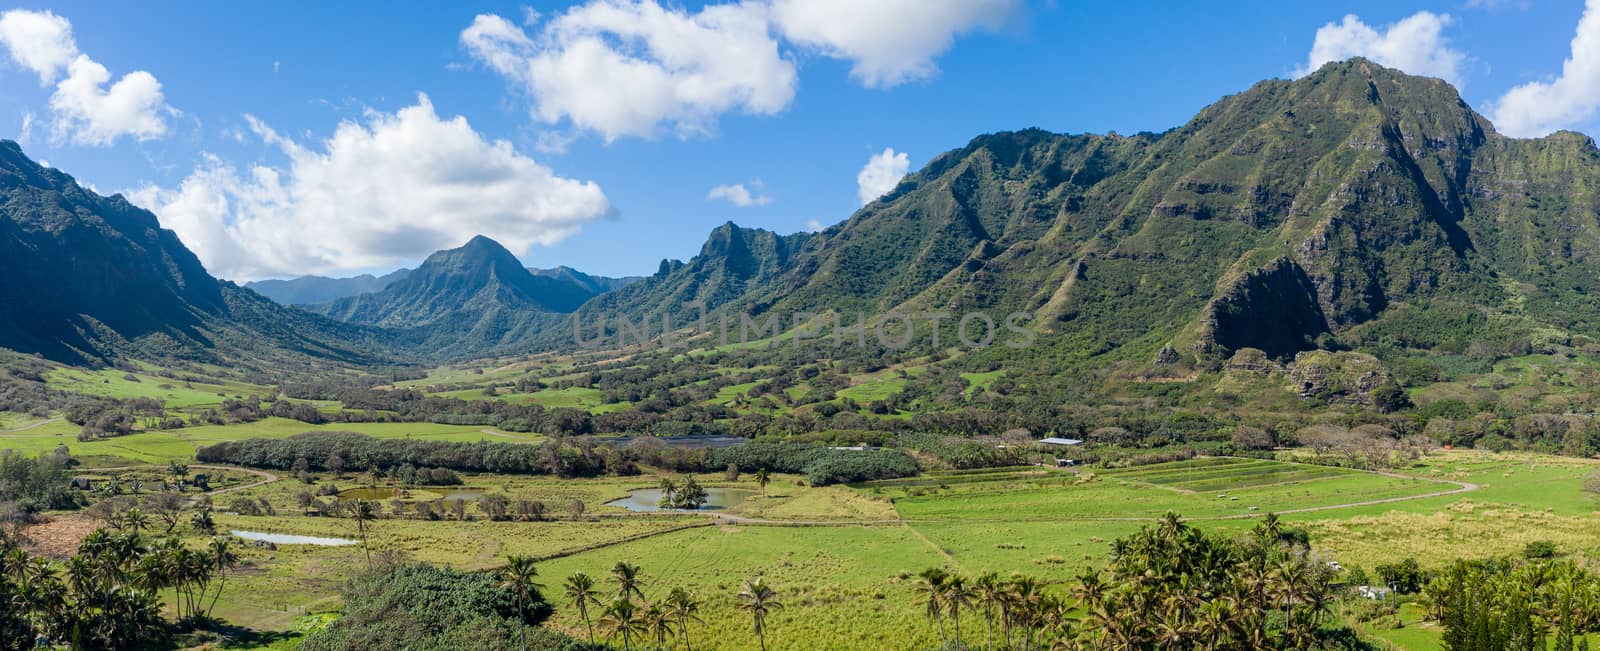 Panorama of Kaaawa valley with mountains in the background by steheap